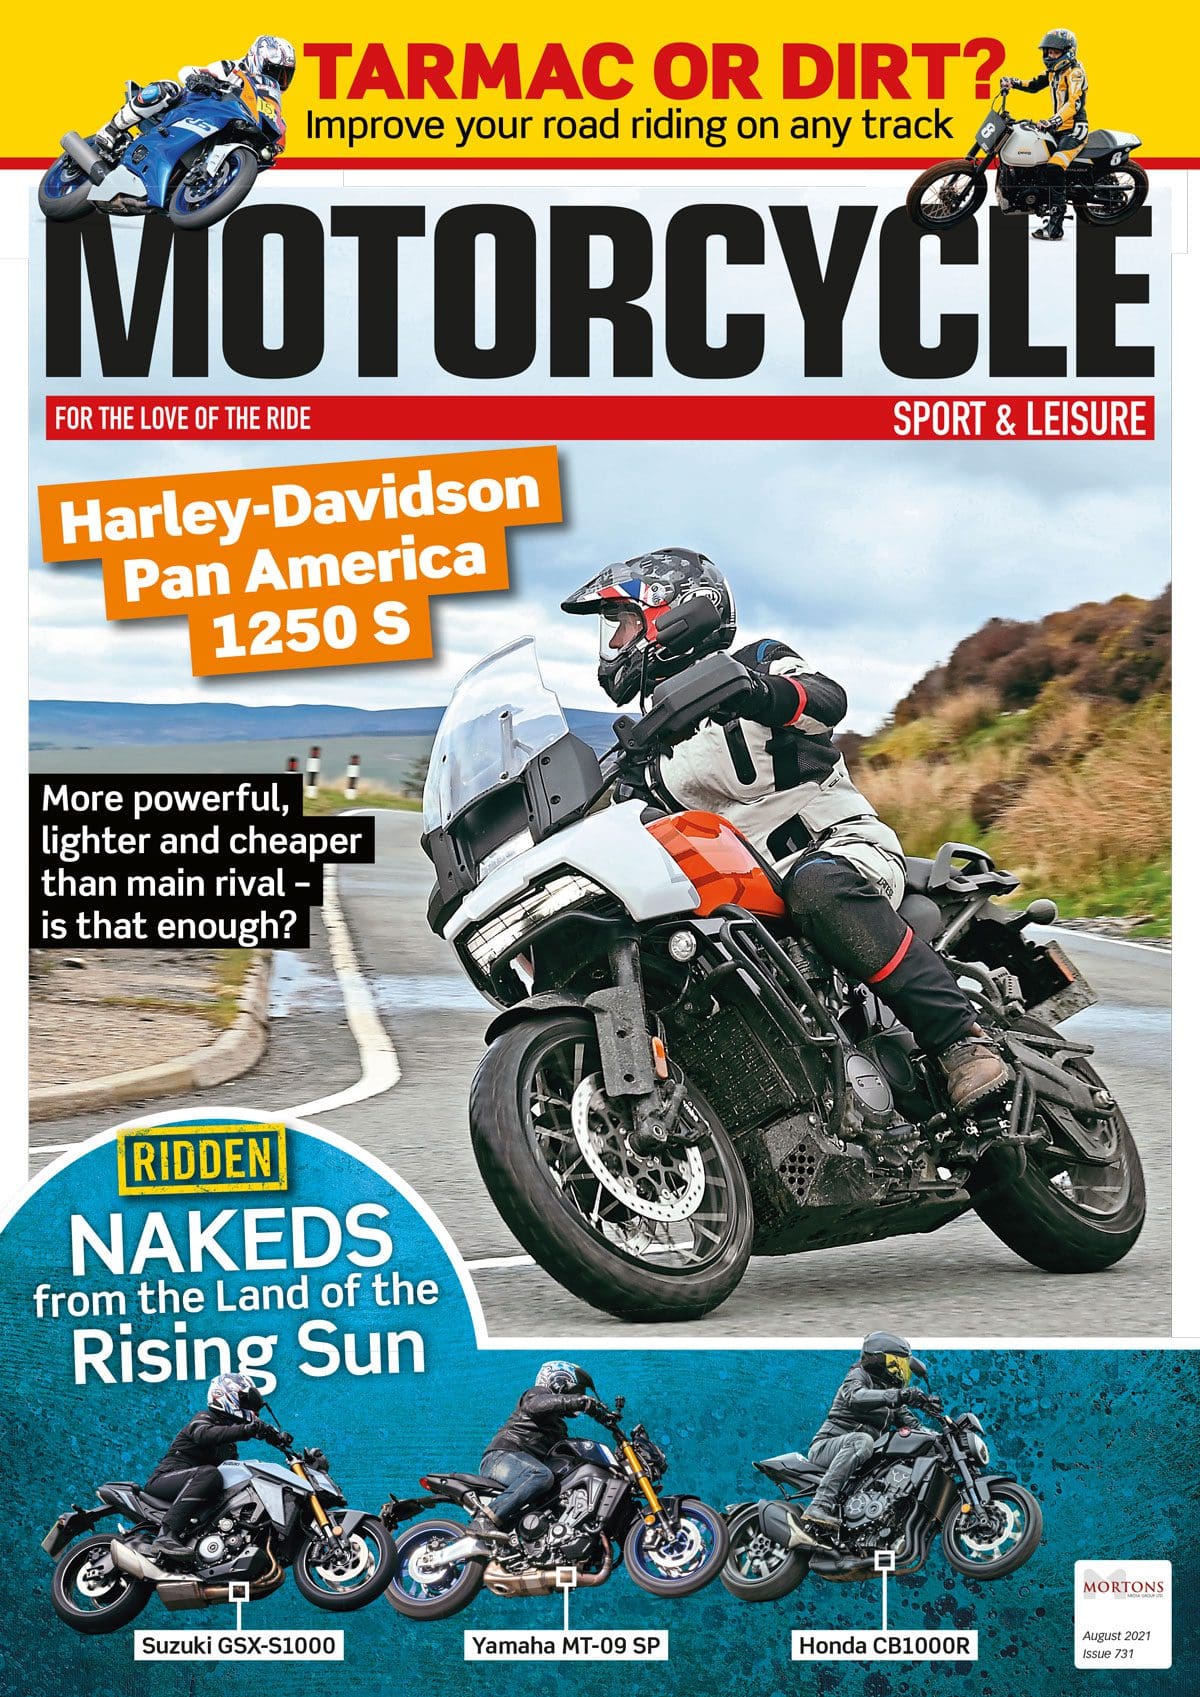 PREVIEW: August issue of Motorcycle Sport & Leisure magazine